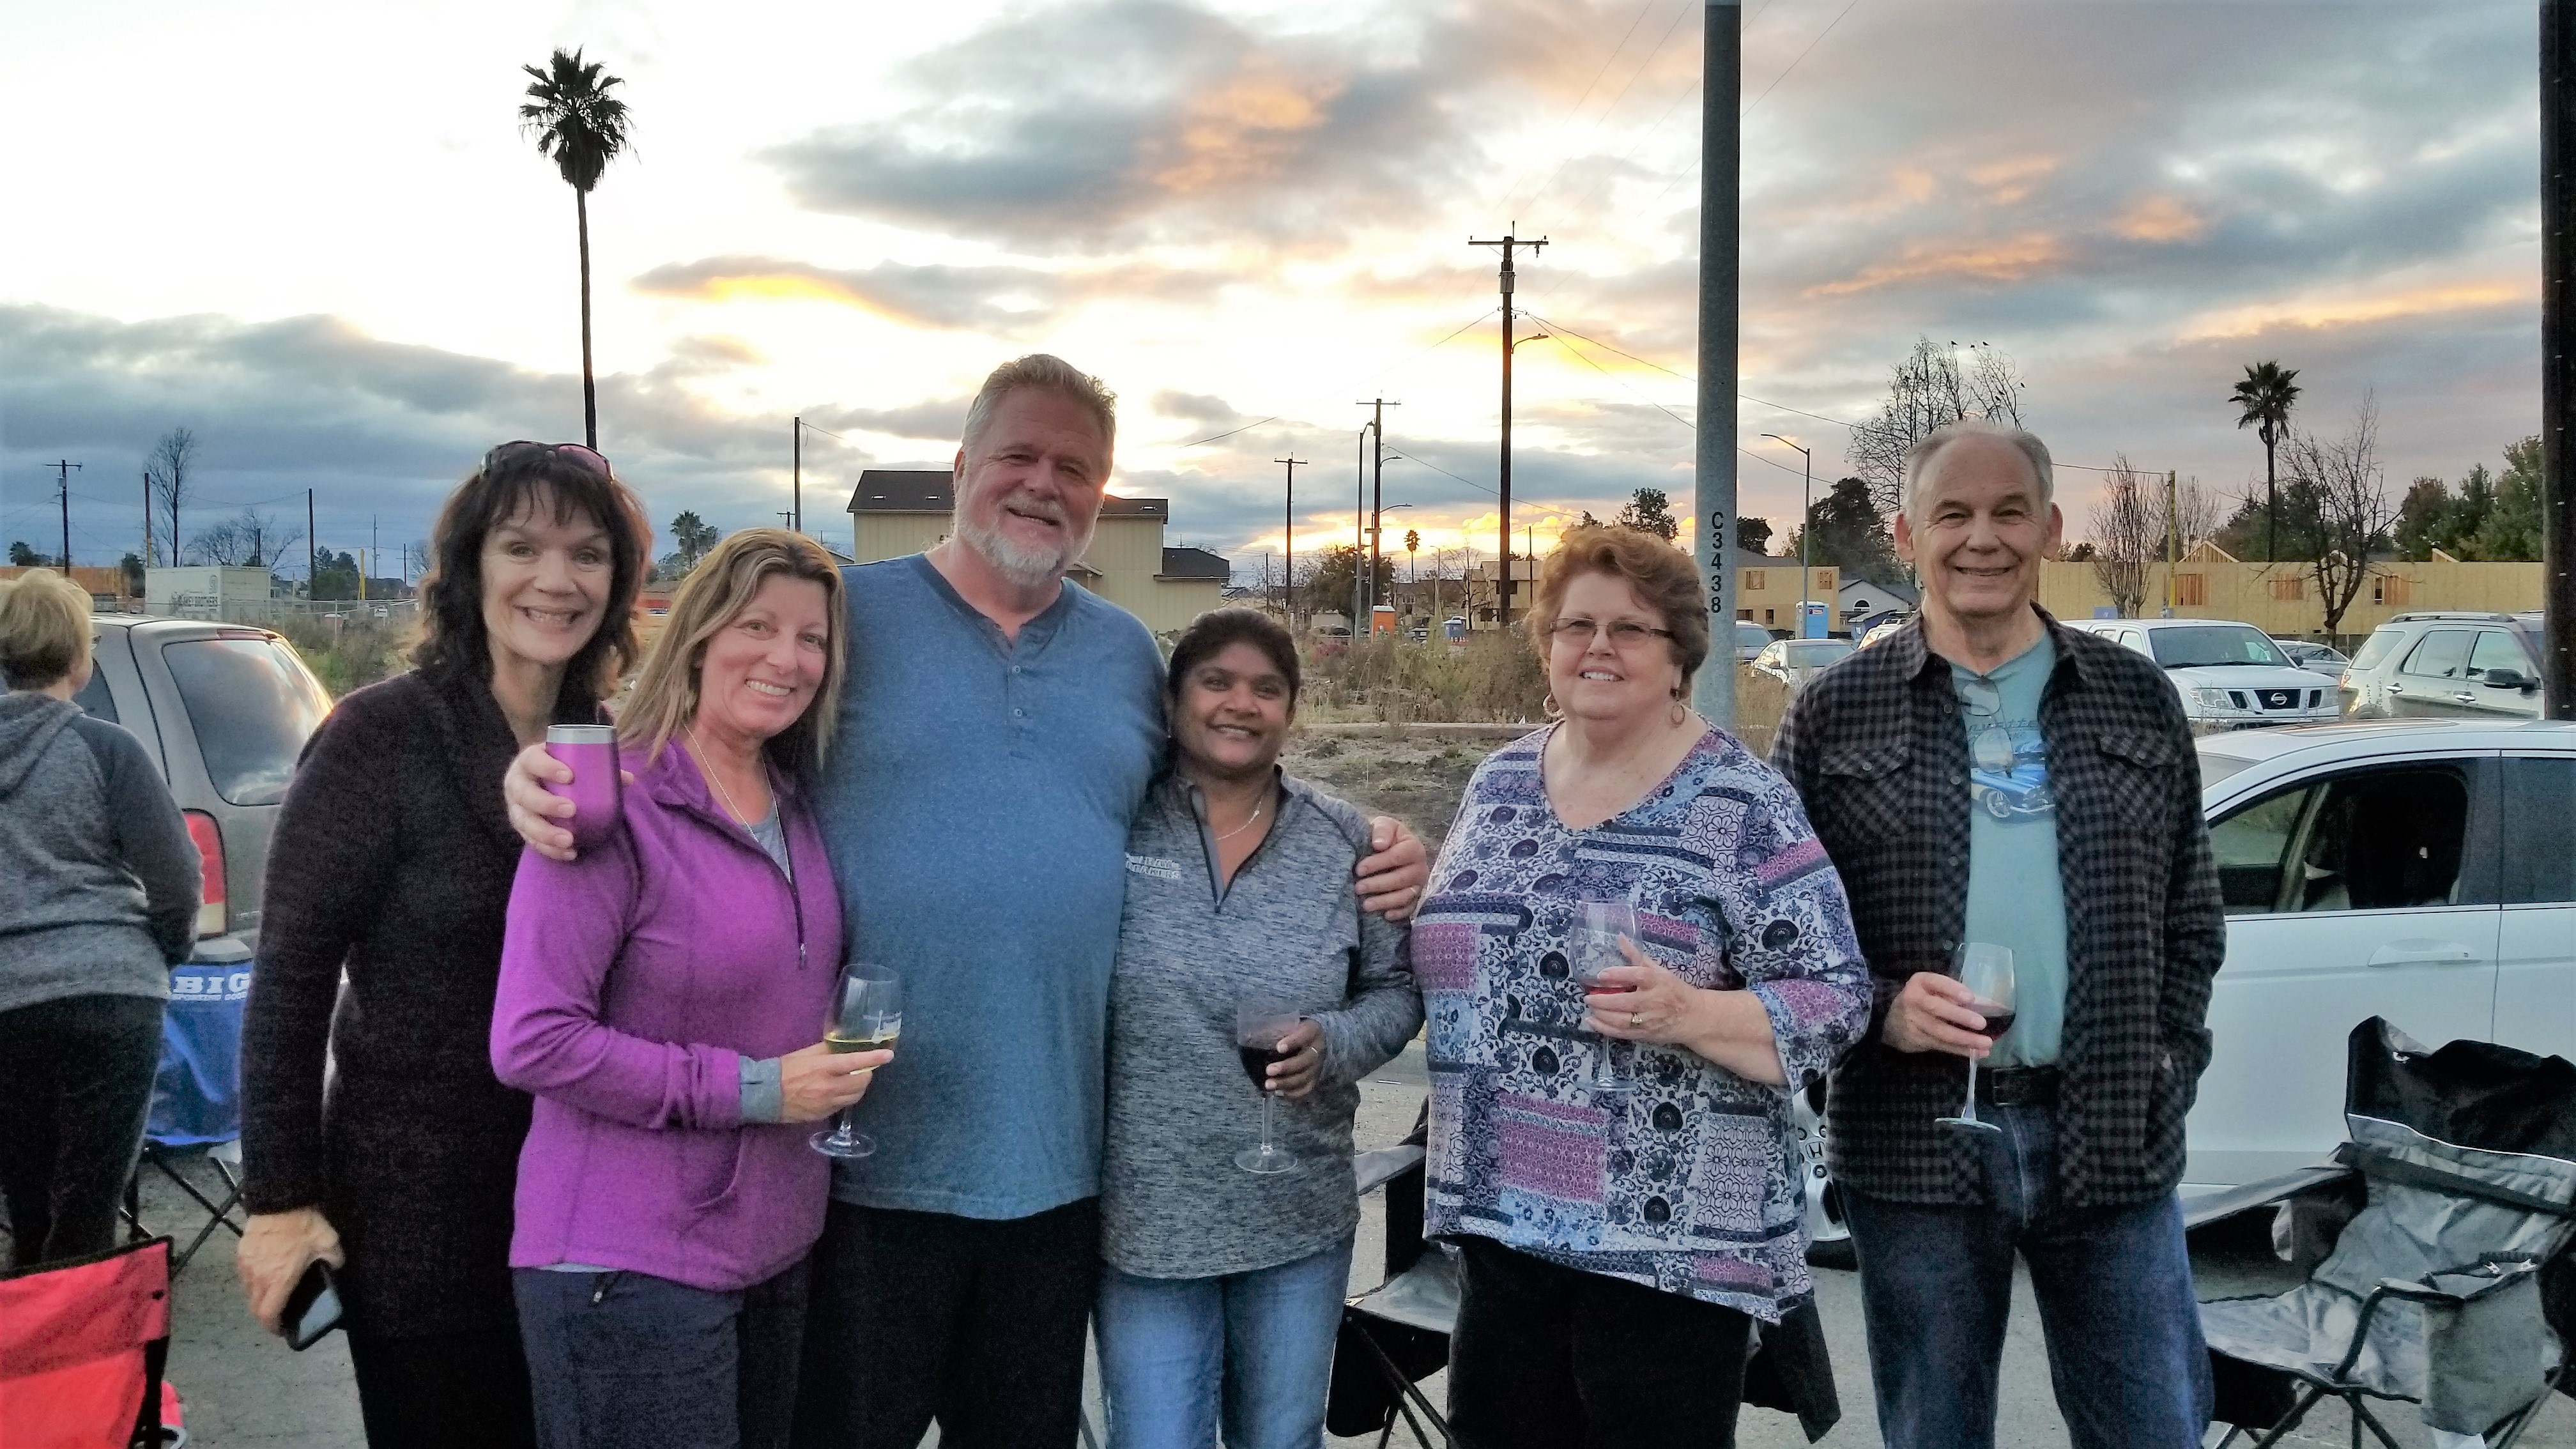 Tricia Woods, a resident of the Santa Rosa neighborhood Coffey Park, drinks wine with her neighbors. (Courtesy of Tricia Woods)